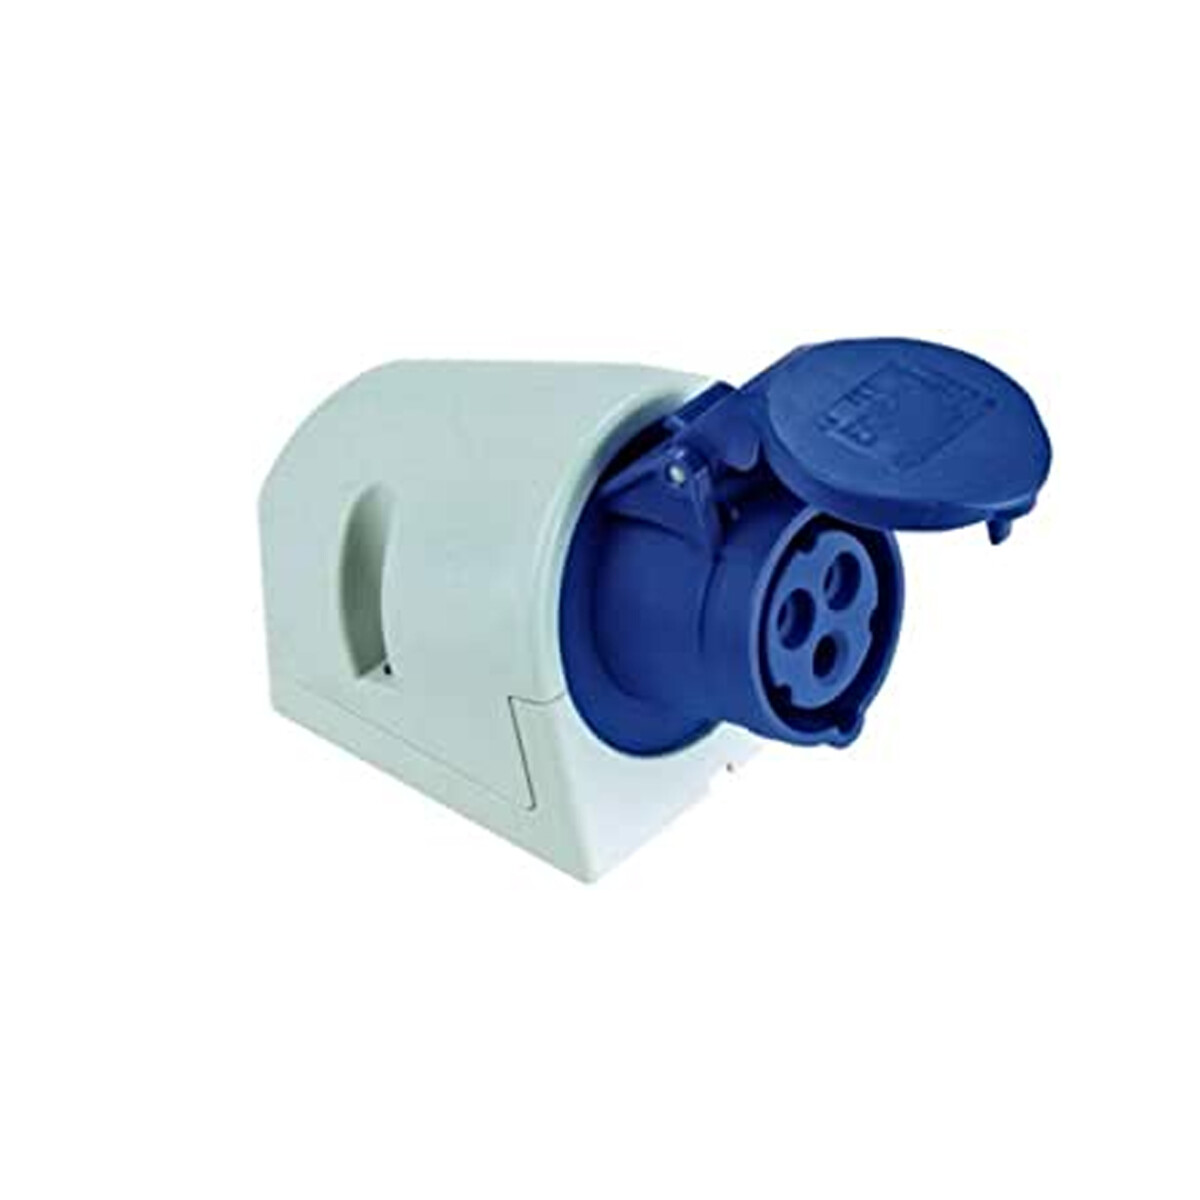 PCE Toma Pared - IP-67 220/240V H6 azul 16A 2P+T 